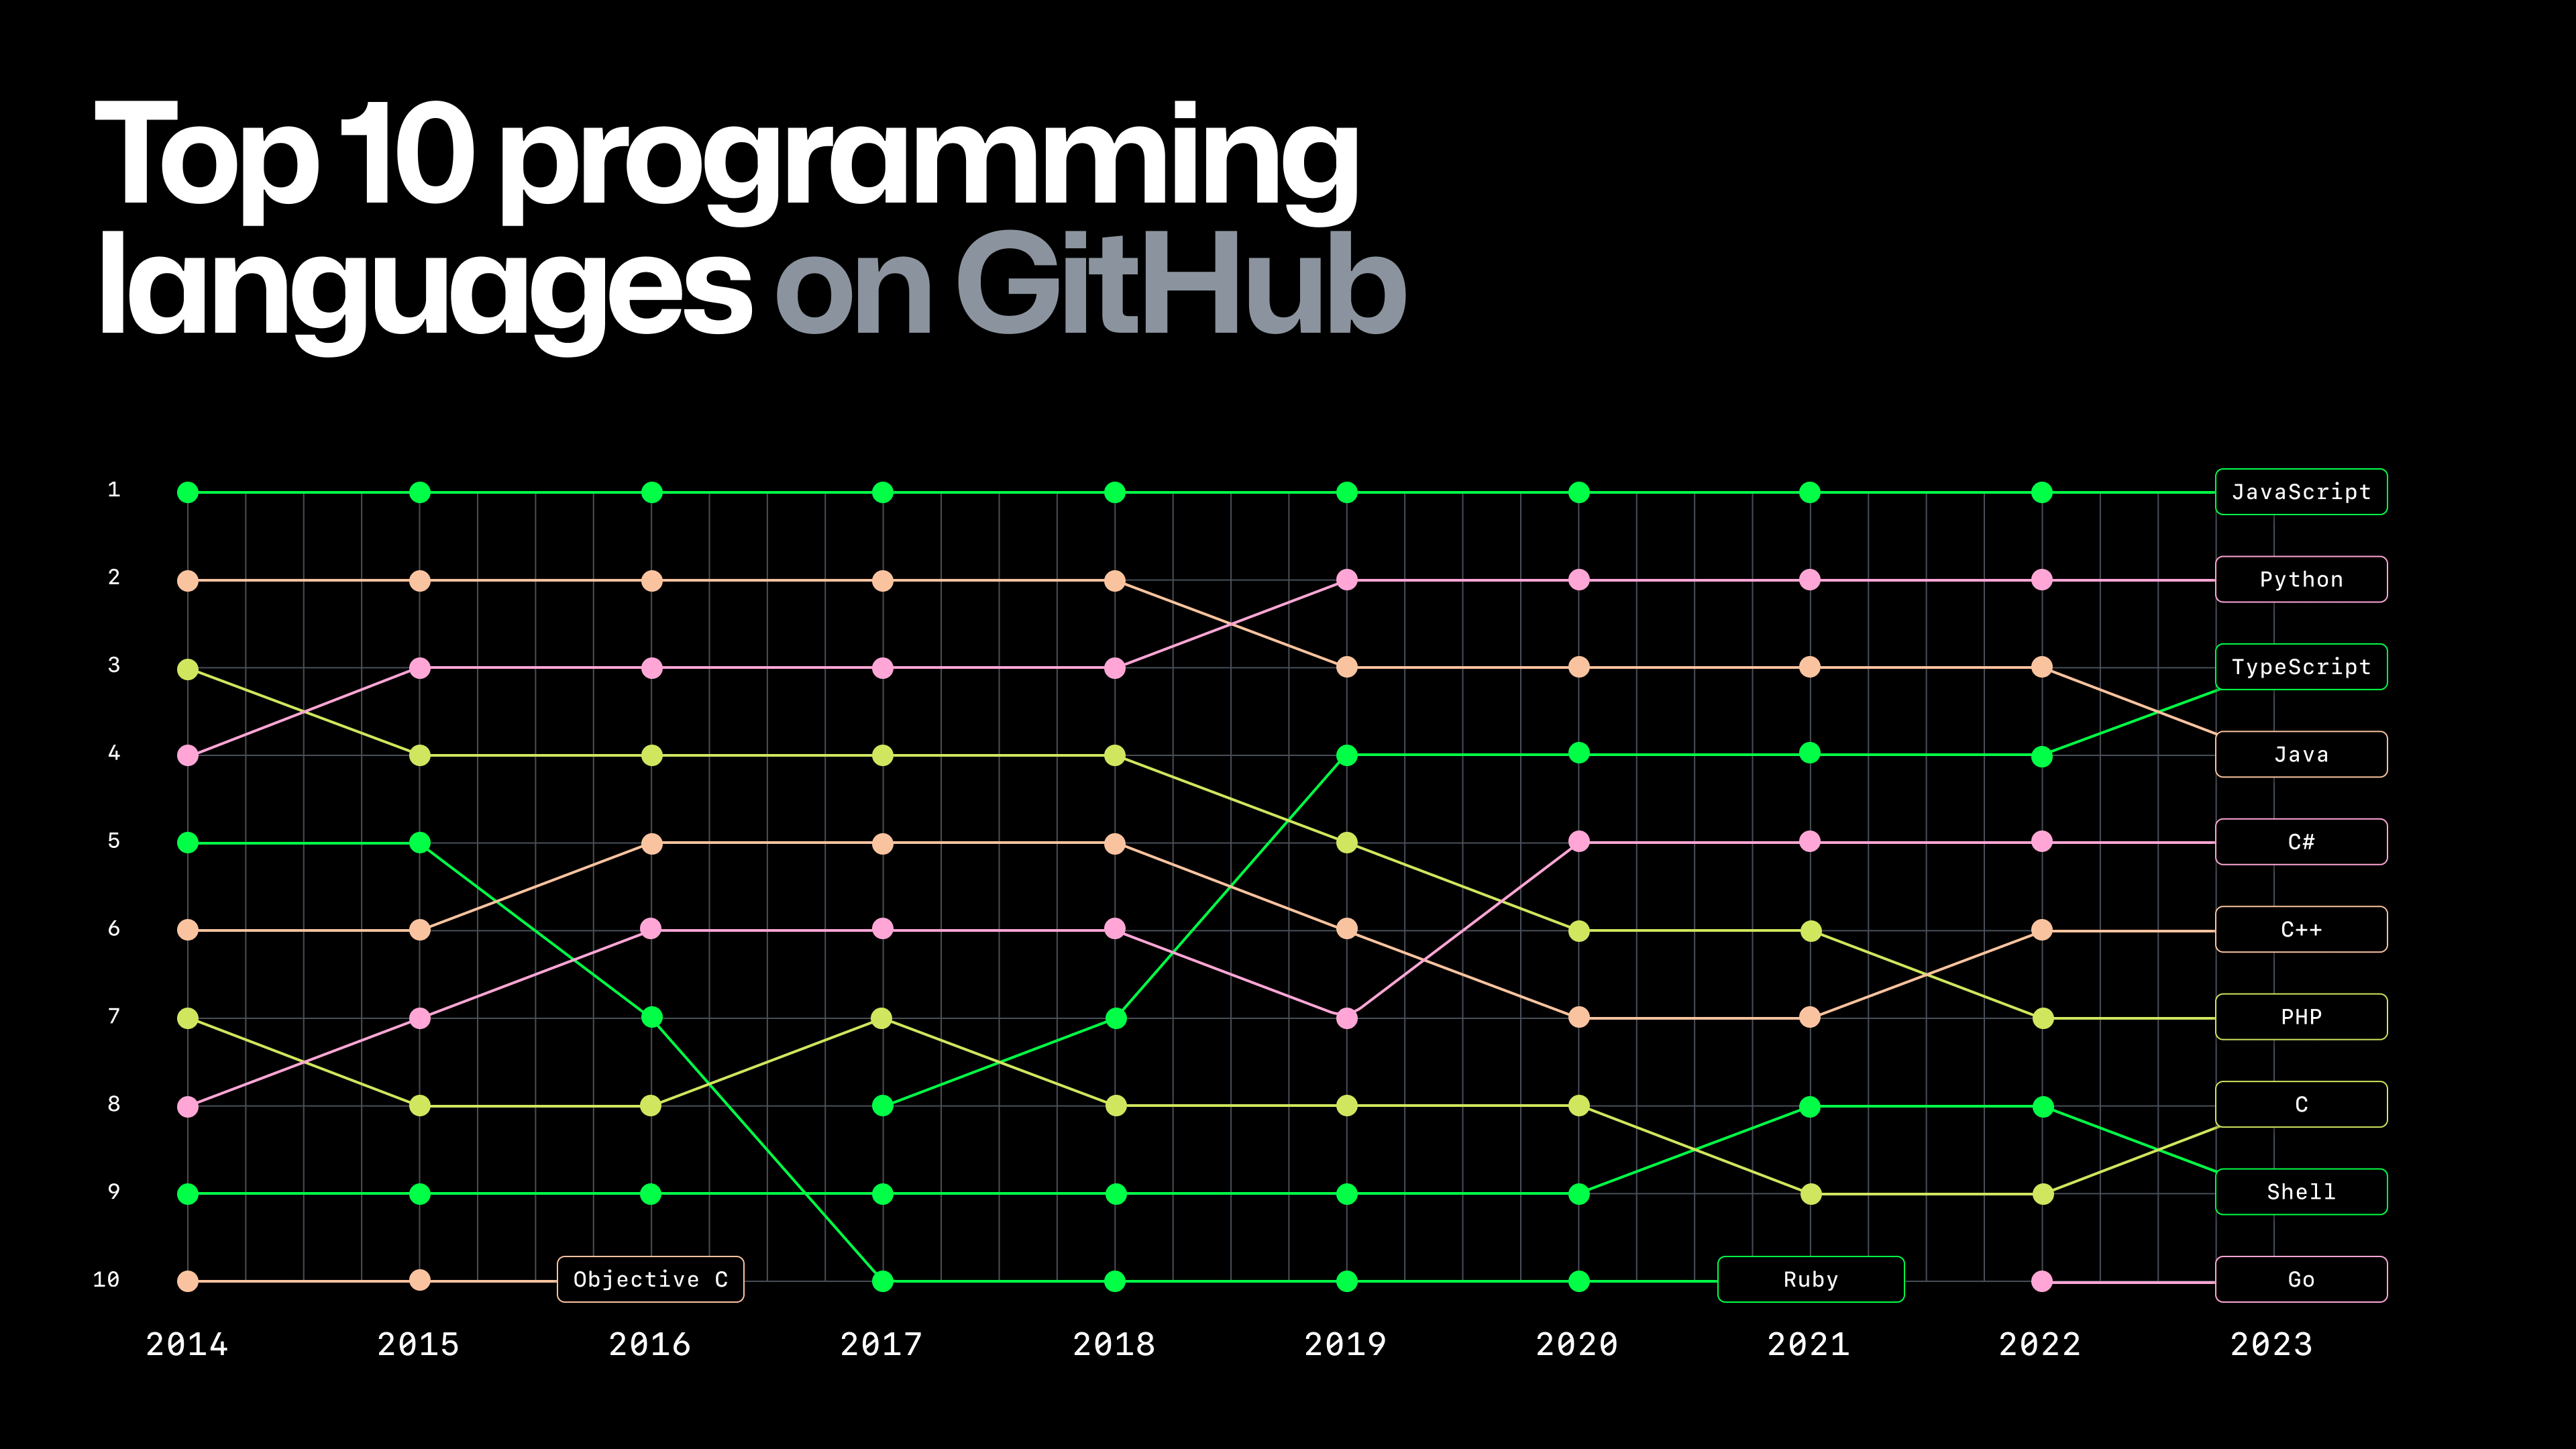 A chart showing the top 10 programming languages on GitHub from 2014-2023. 